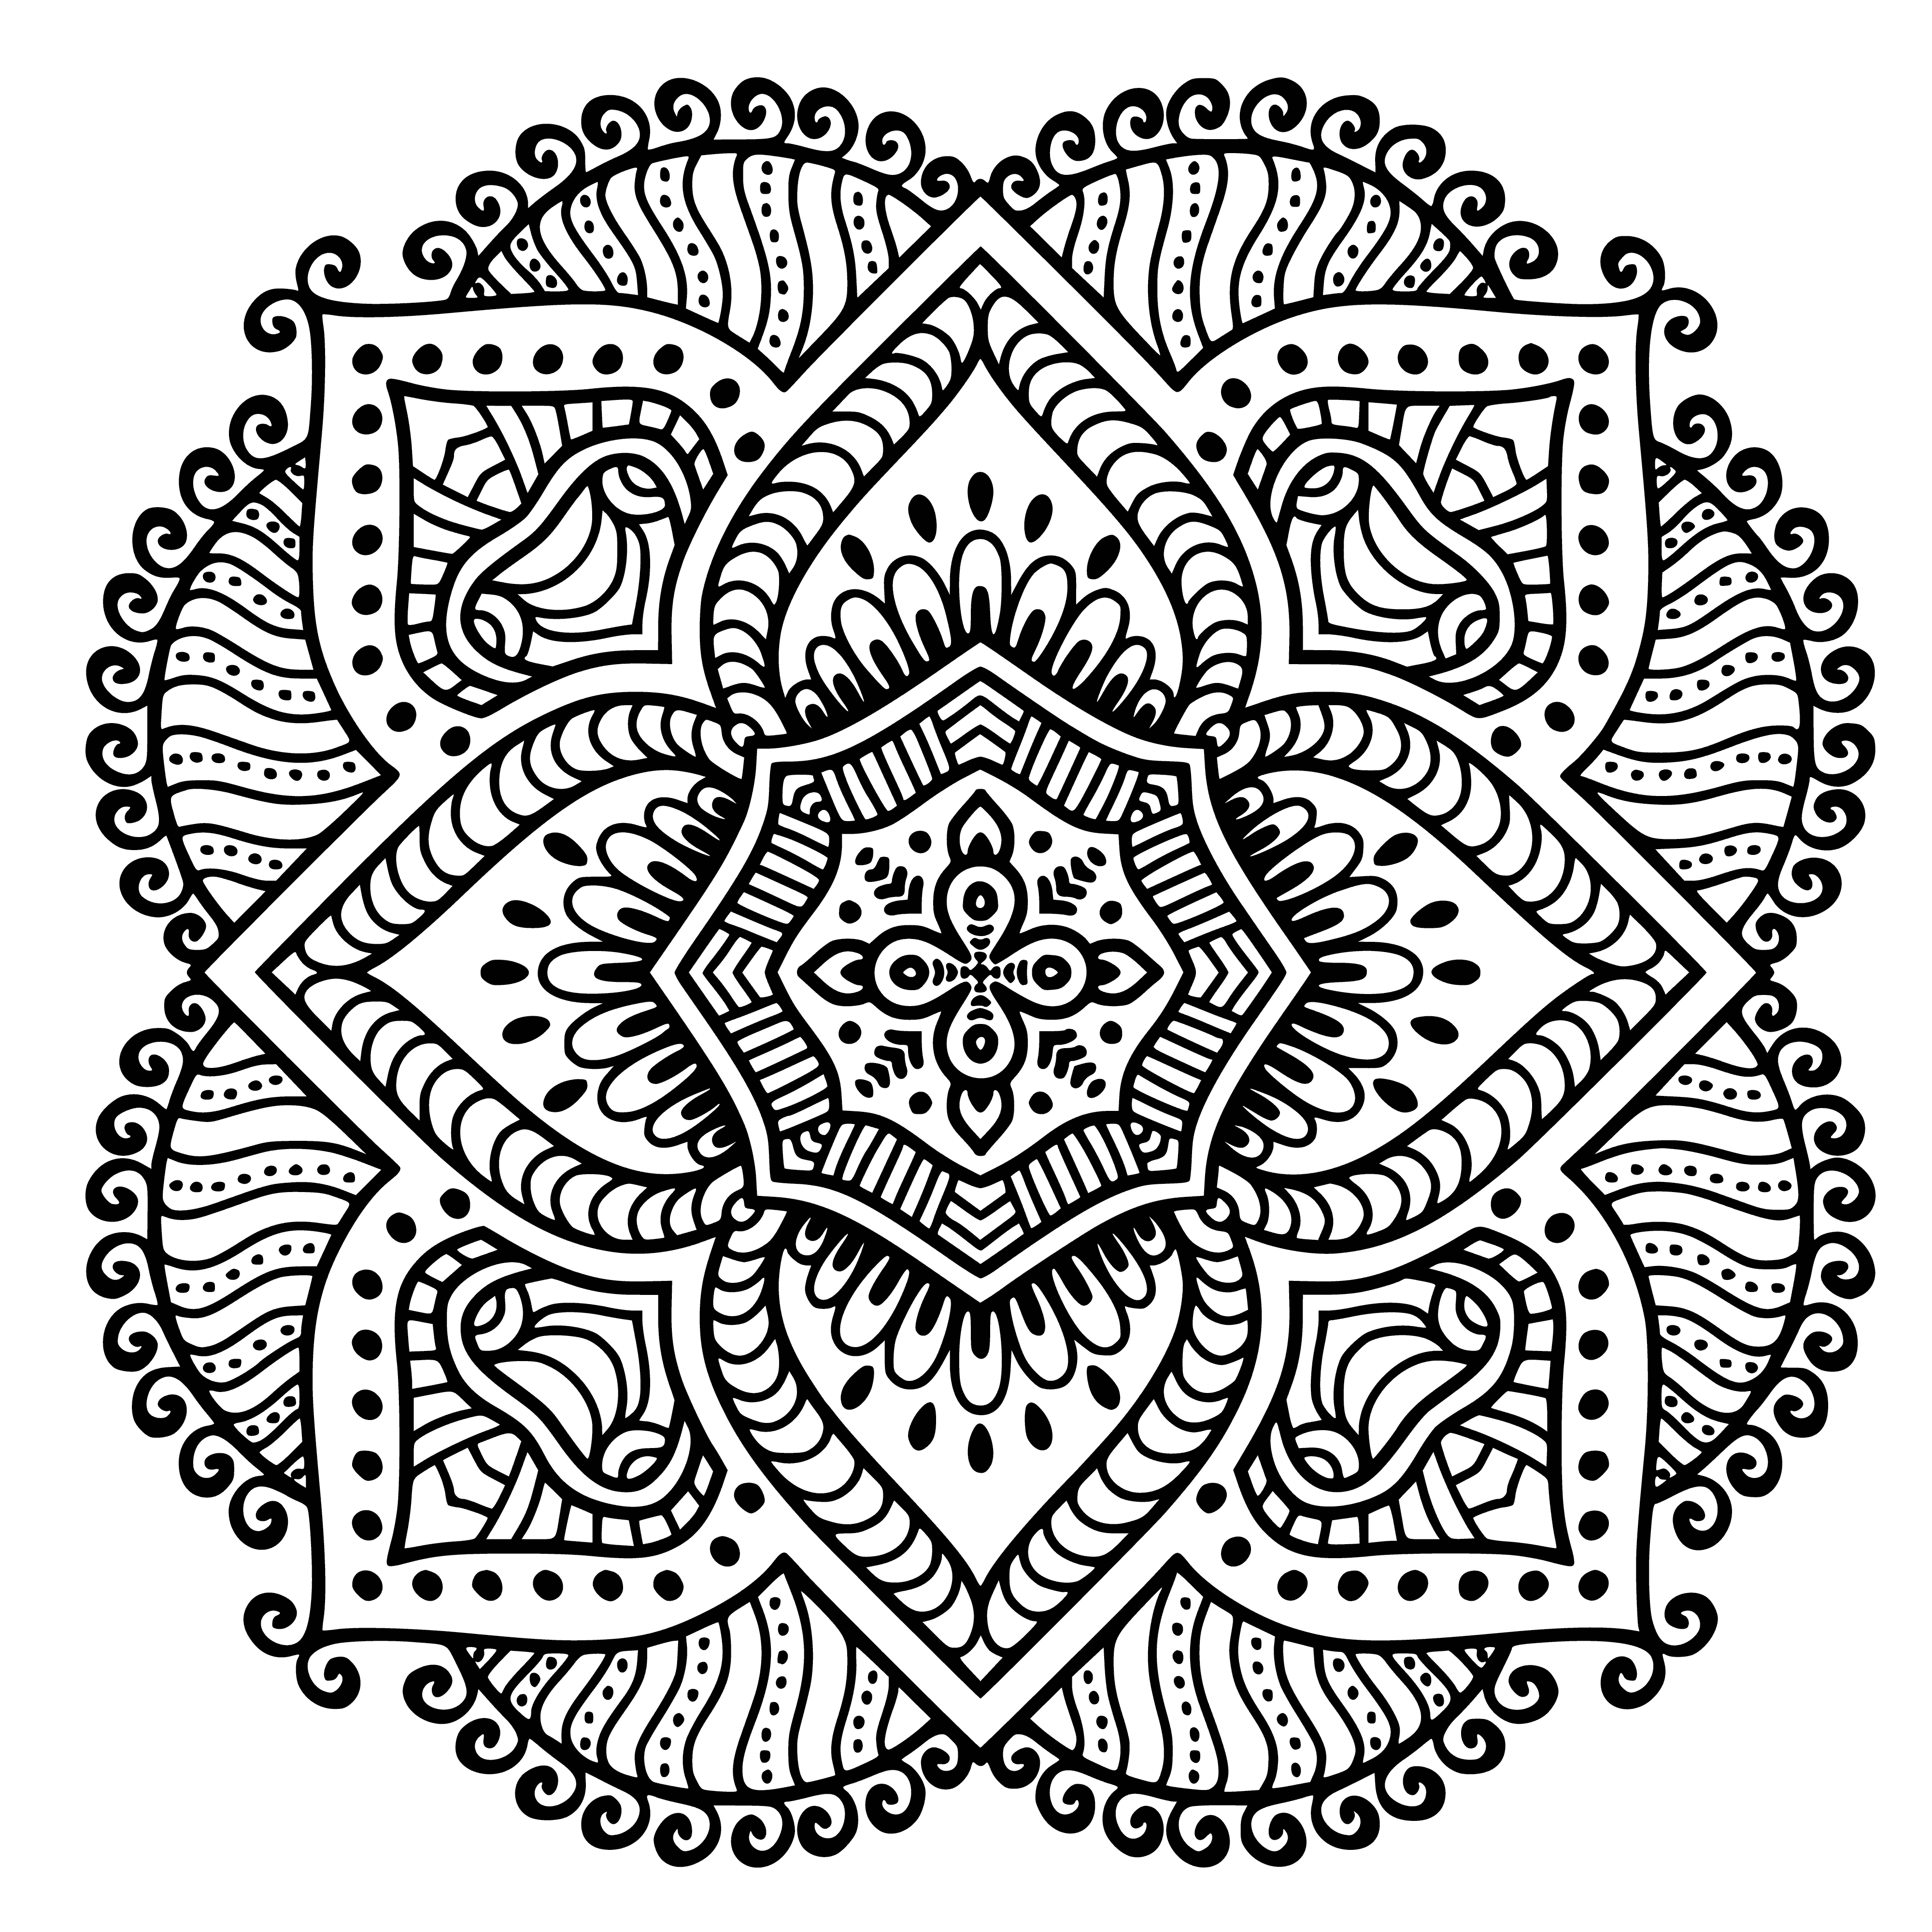 coloring page: Mandalas are symmetrical, intricate designs often used in coloring pages with a central motif.